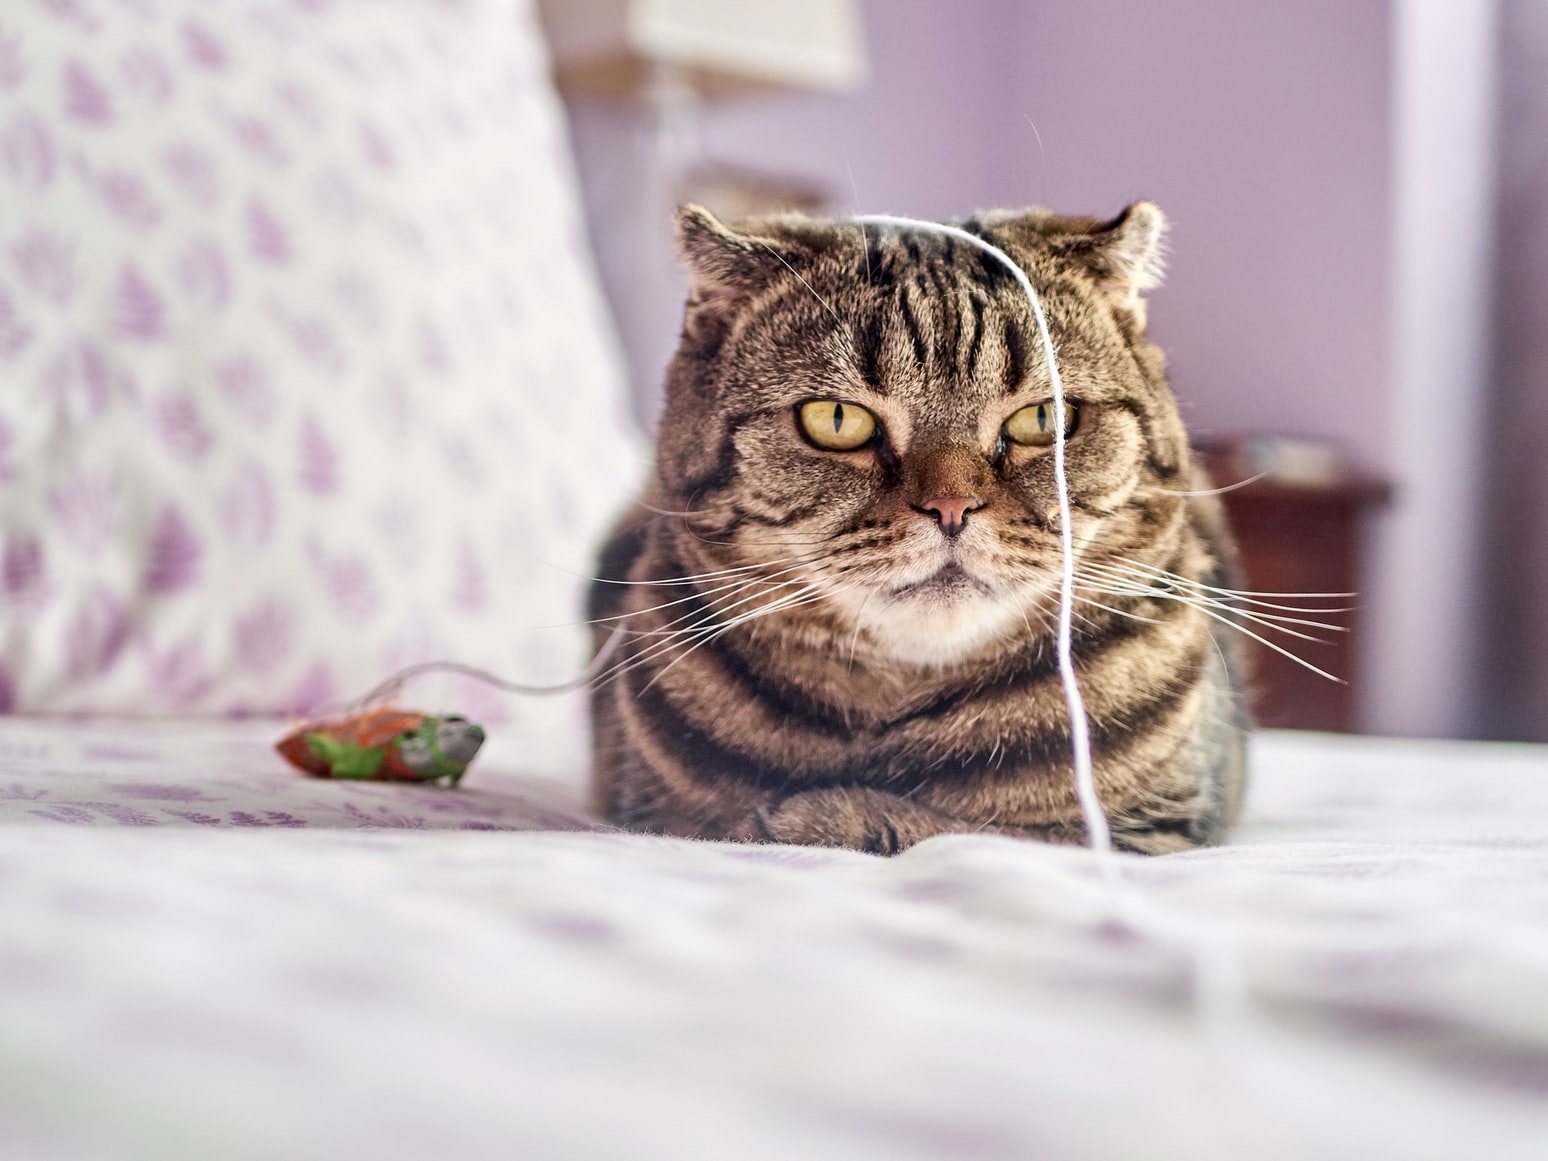 Unimpressed cat beside toy with string dangling over its head